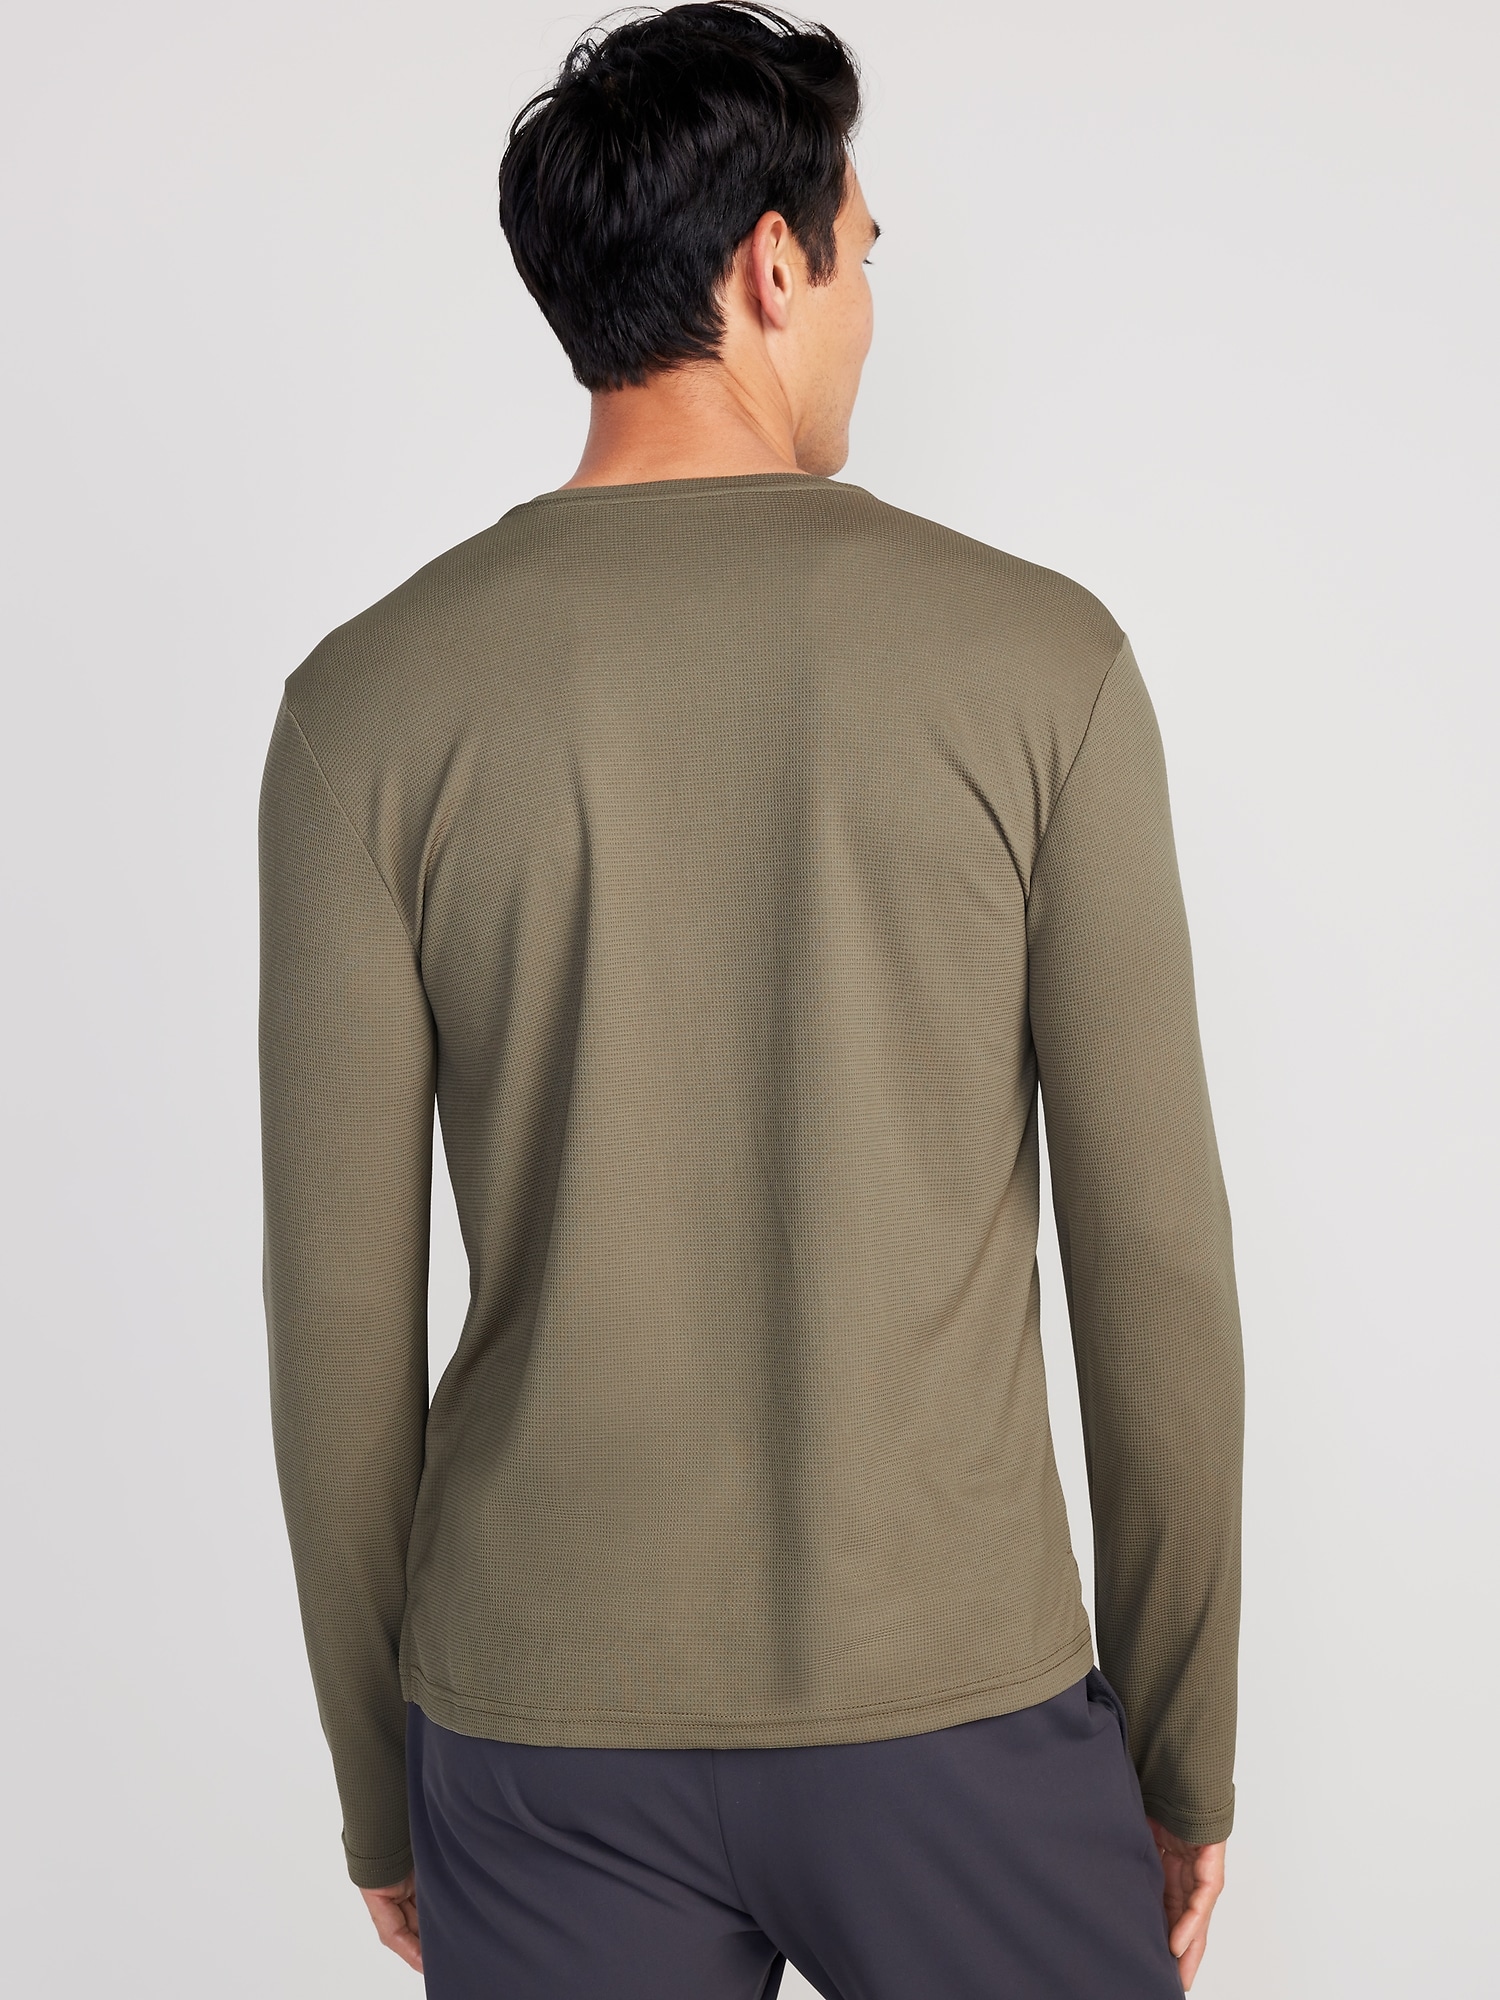 Long-Sleeve Thermal-Knit Performance Henley for Men | Old Navy